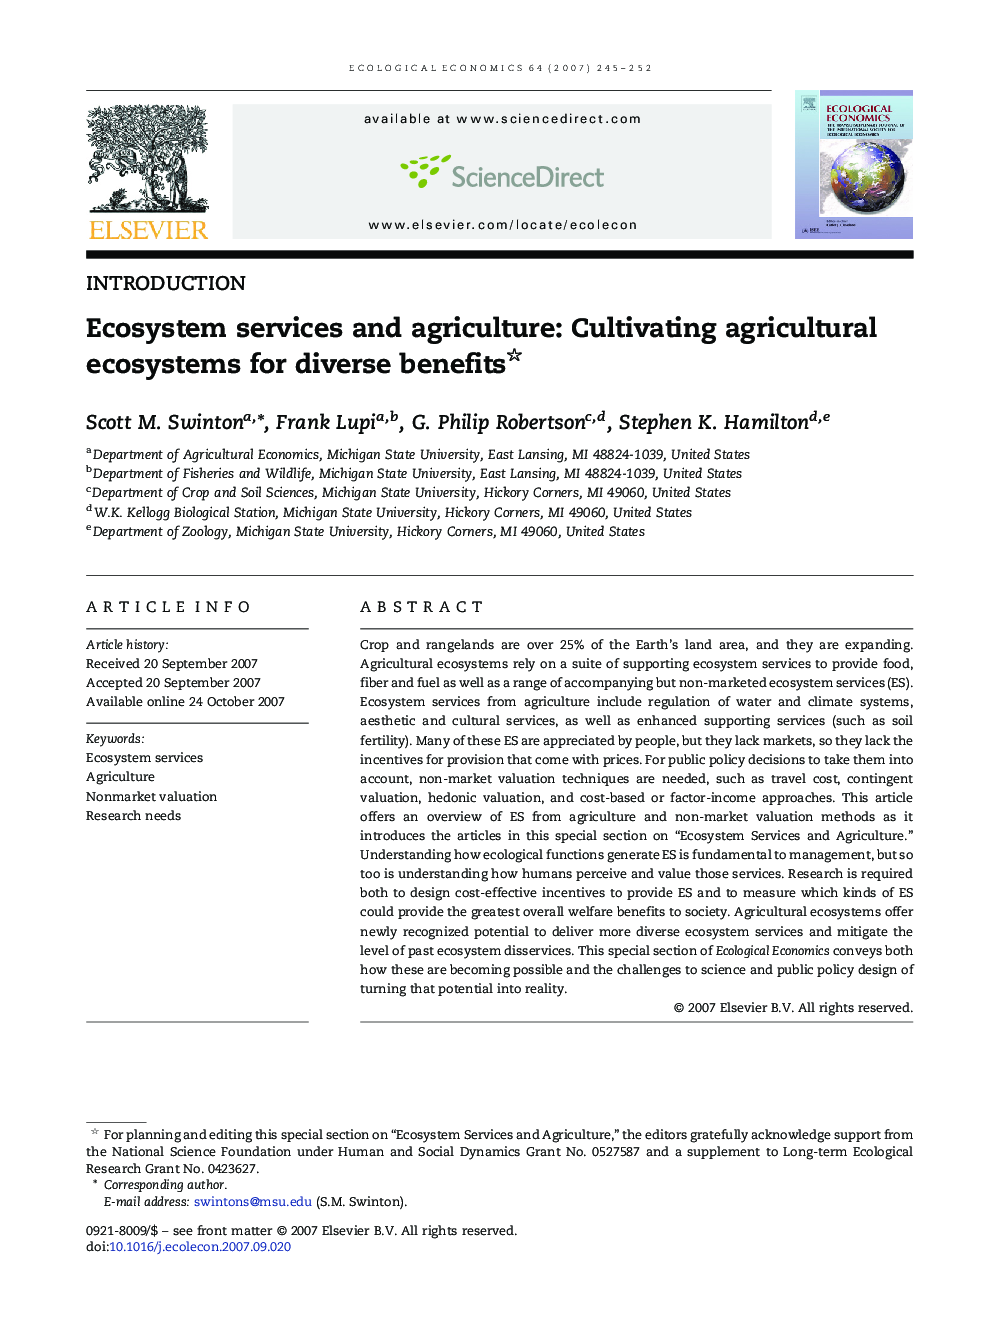 Ecosystem services and agriculture: Cultivating agricultural ecosystems for diverse benefits